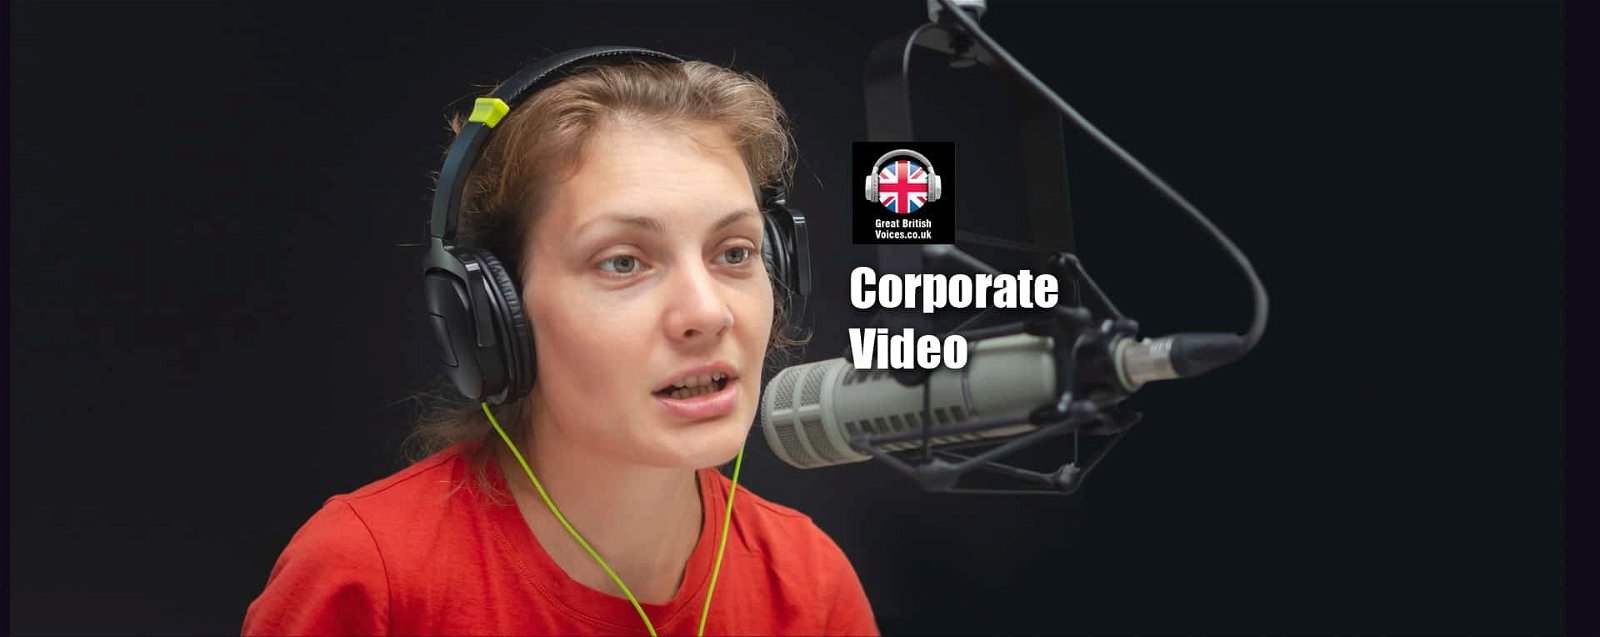 Corporate video Voices at Great British Voices-min